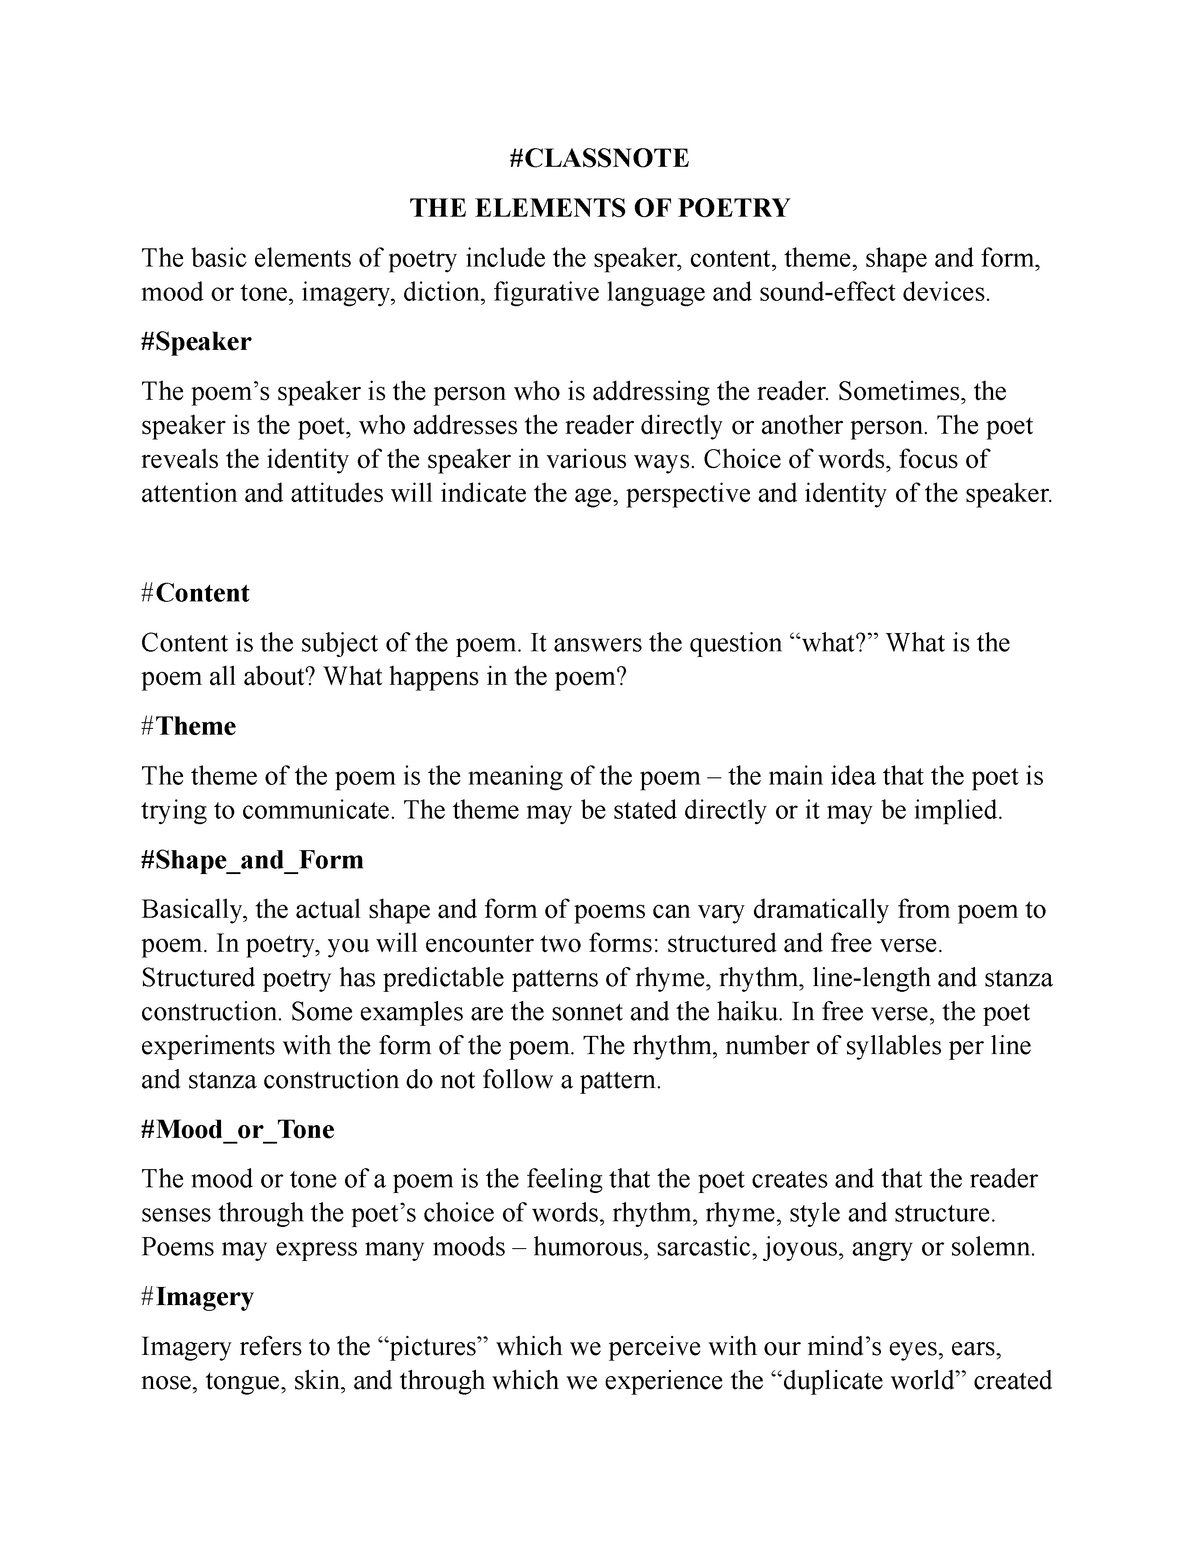 classnote-element-of-poetry-classnote-the-elements-of-poetry-the-basic-elements-of-poetry